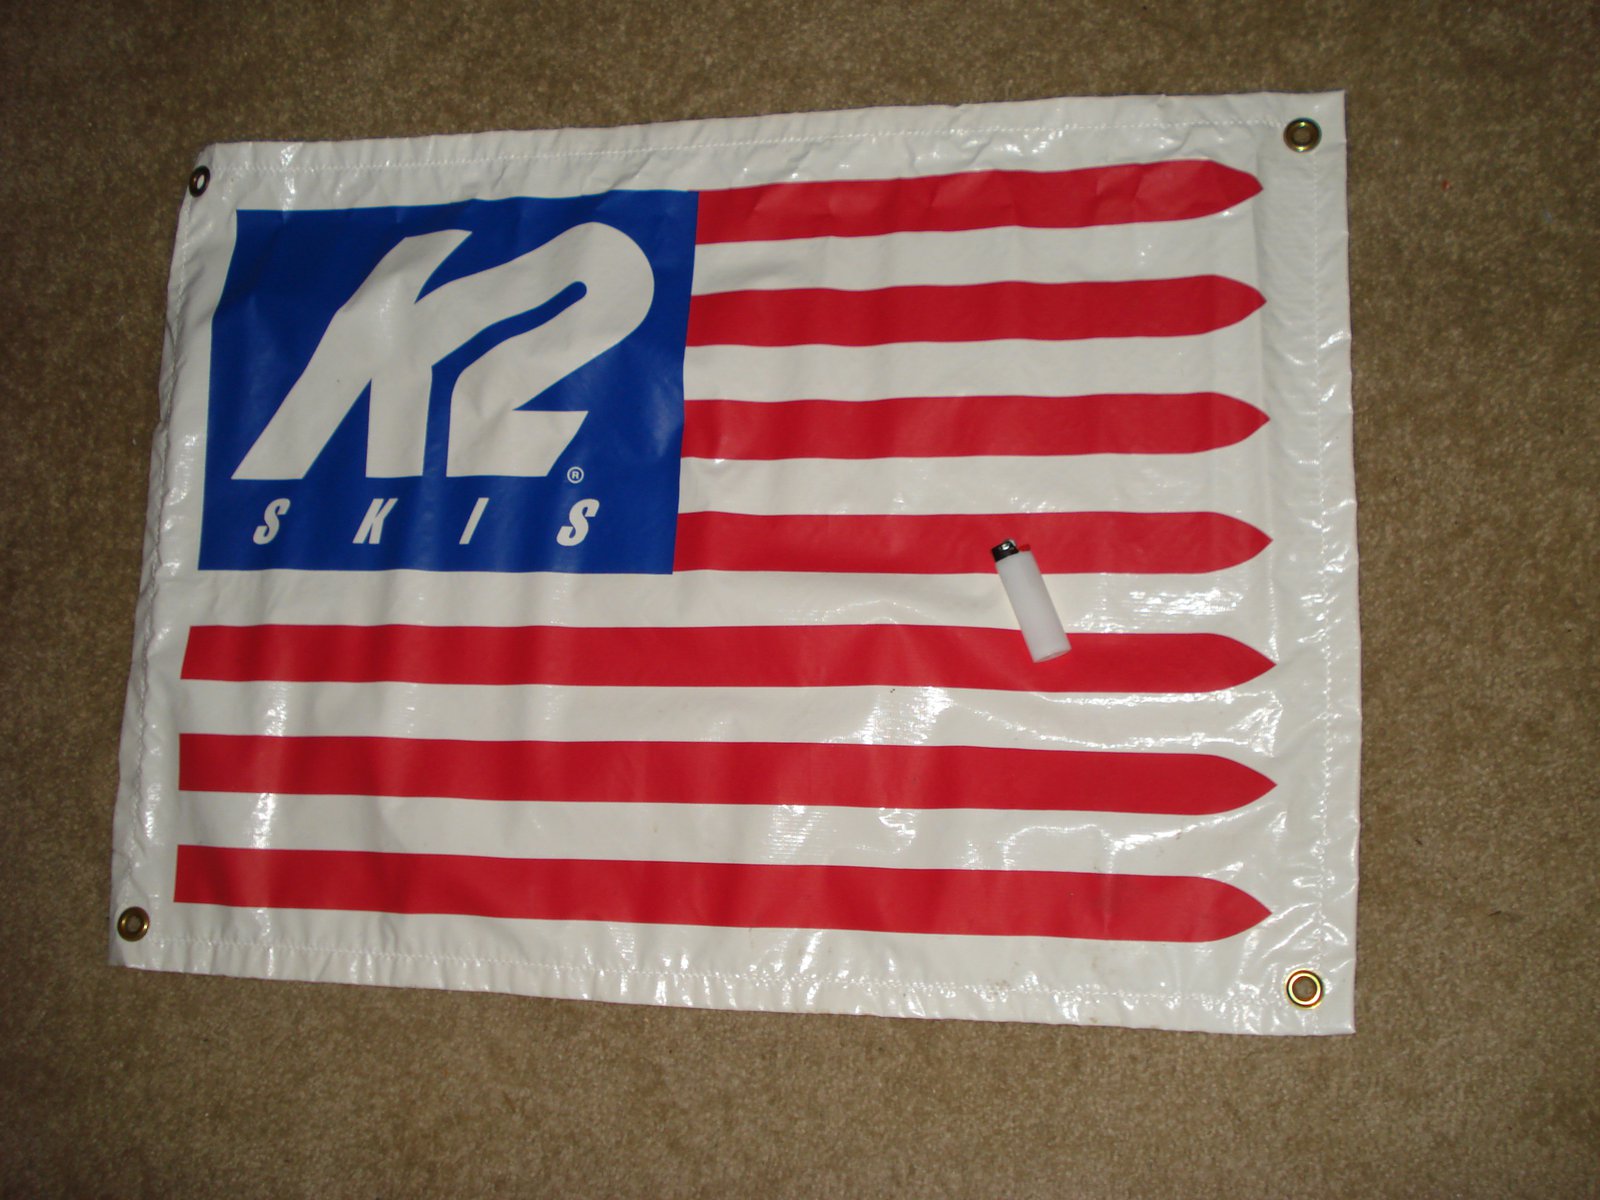 K2 banner MAYBE for sale